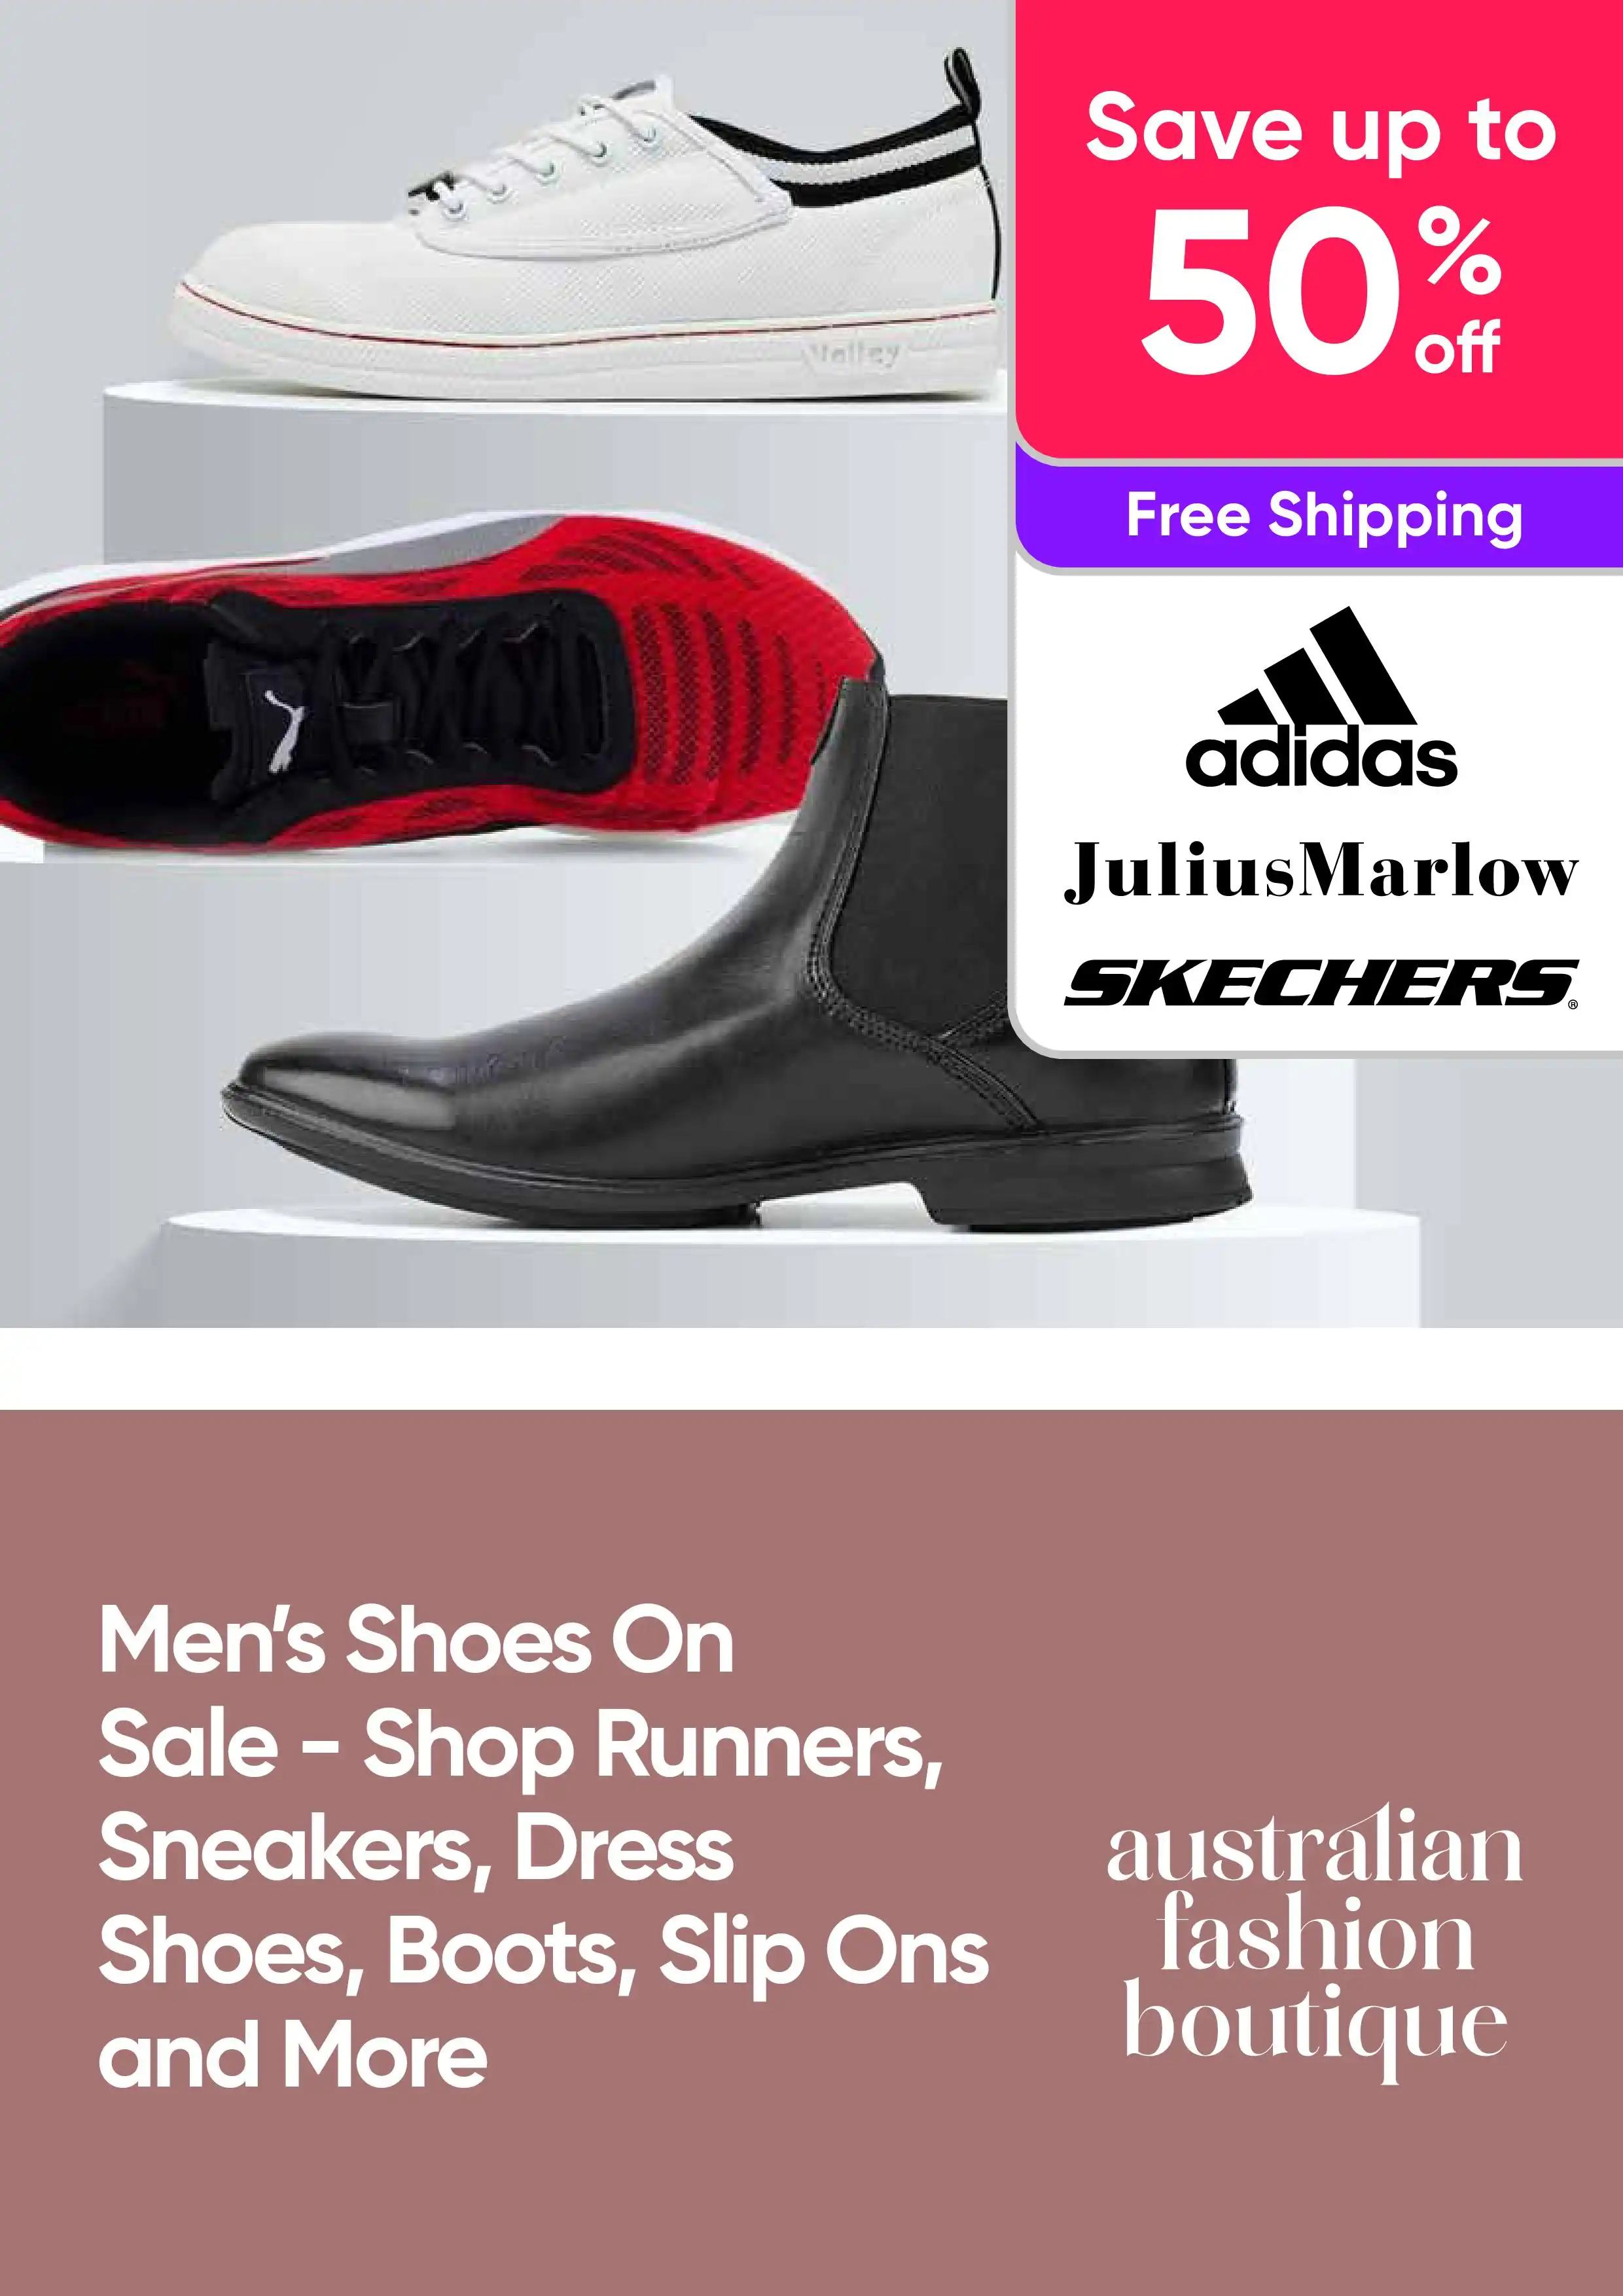 Mens Shoes On Sale Up to 50% Off RRP - Shop Runners, Sneakers, Dress Shoes, Boots, Slip Ons and More